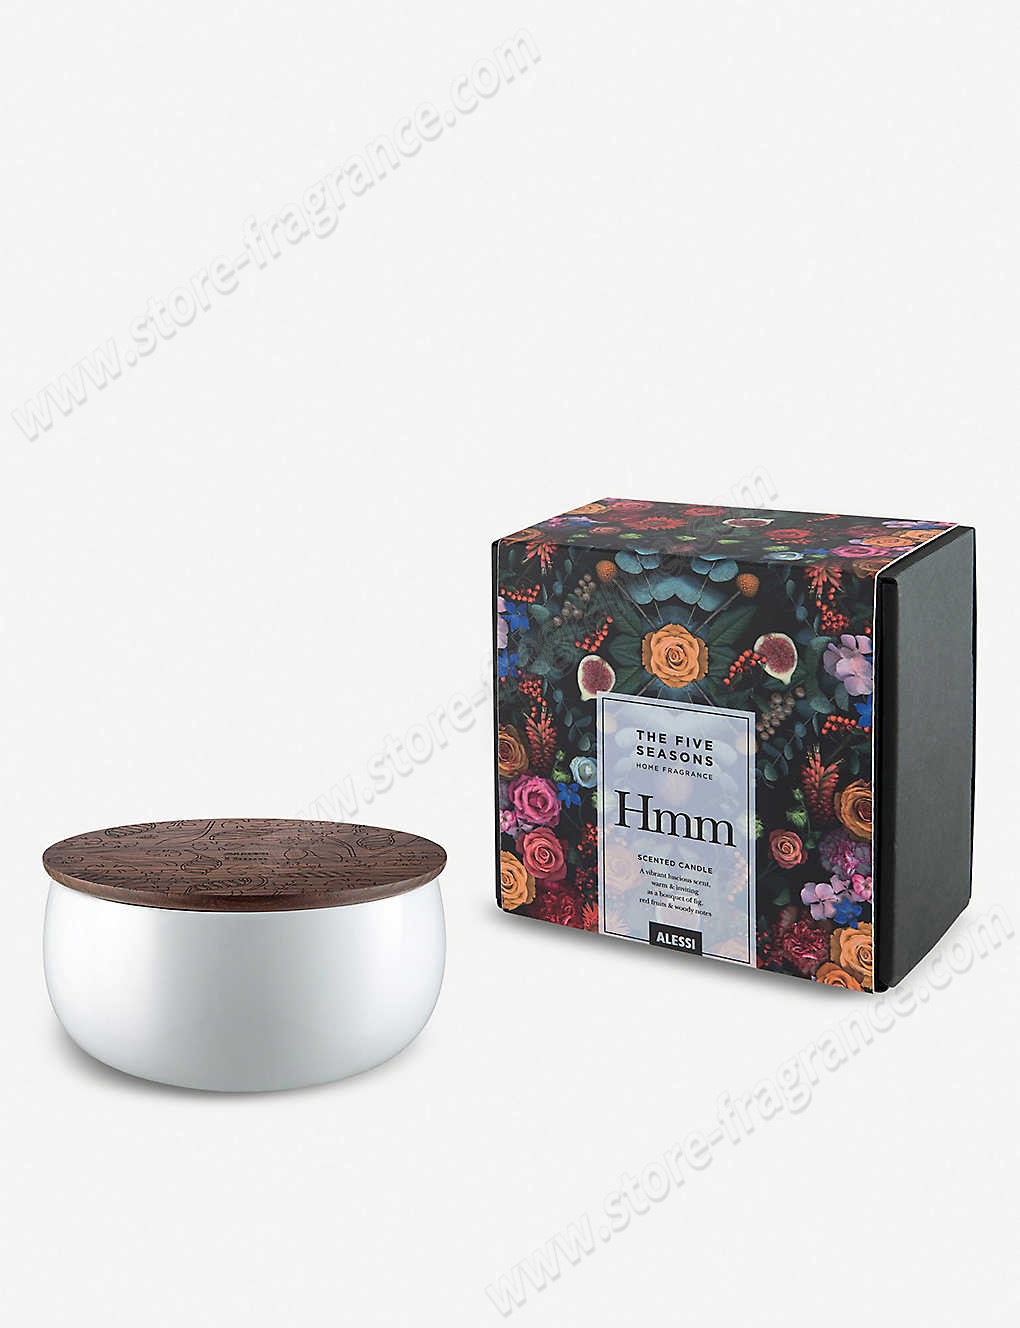 ALESSI/Five Seasons Hmm Scented candle large ✿ Discount Store - ALESSI/Five Seasons Hmm Scented candle large ✿ Discount Store